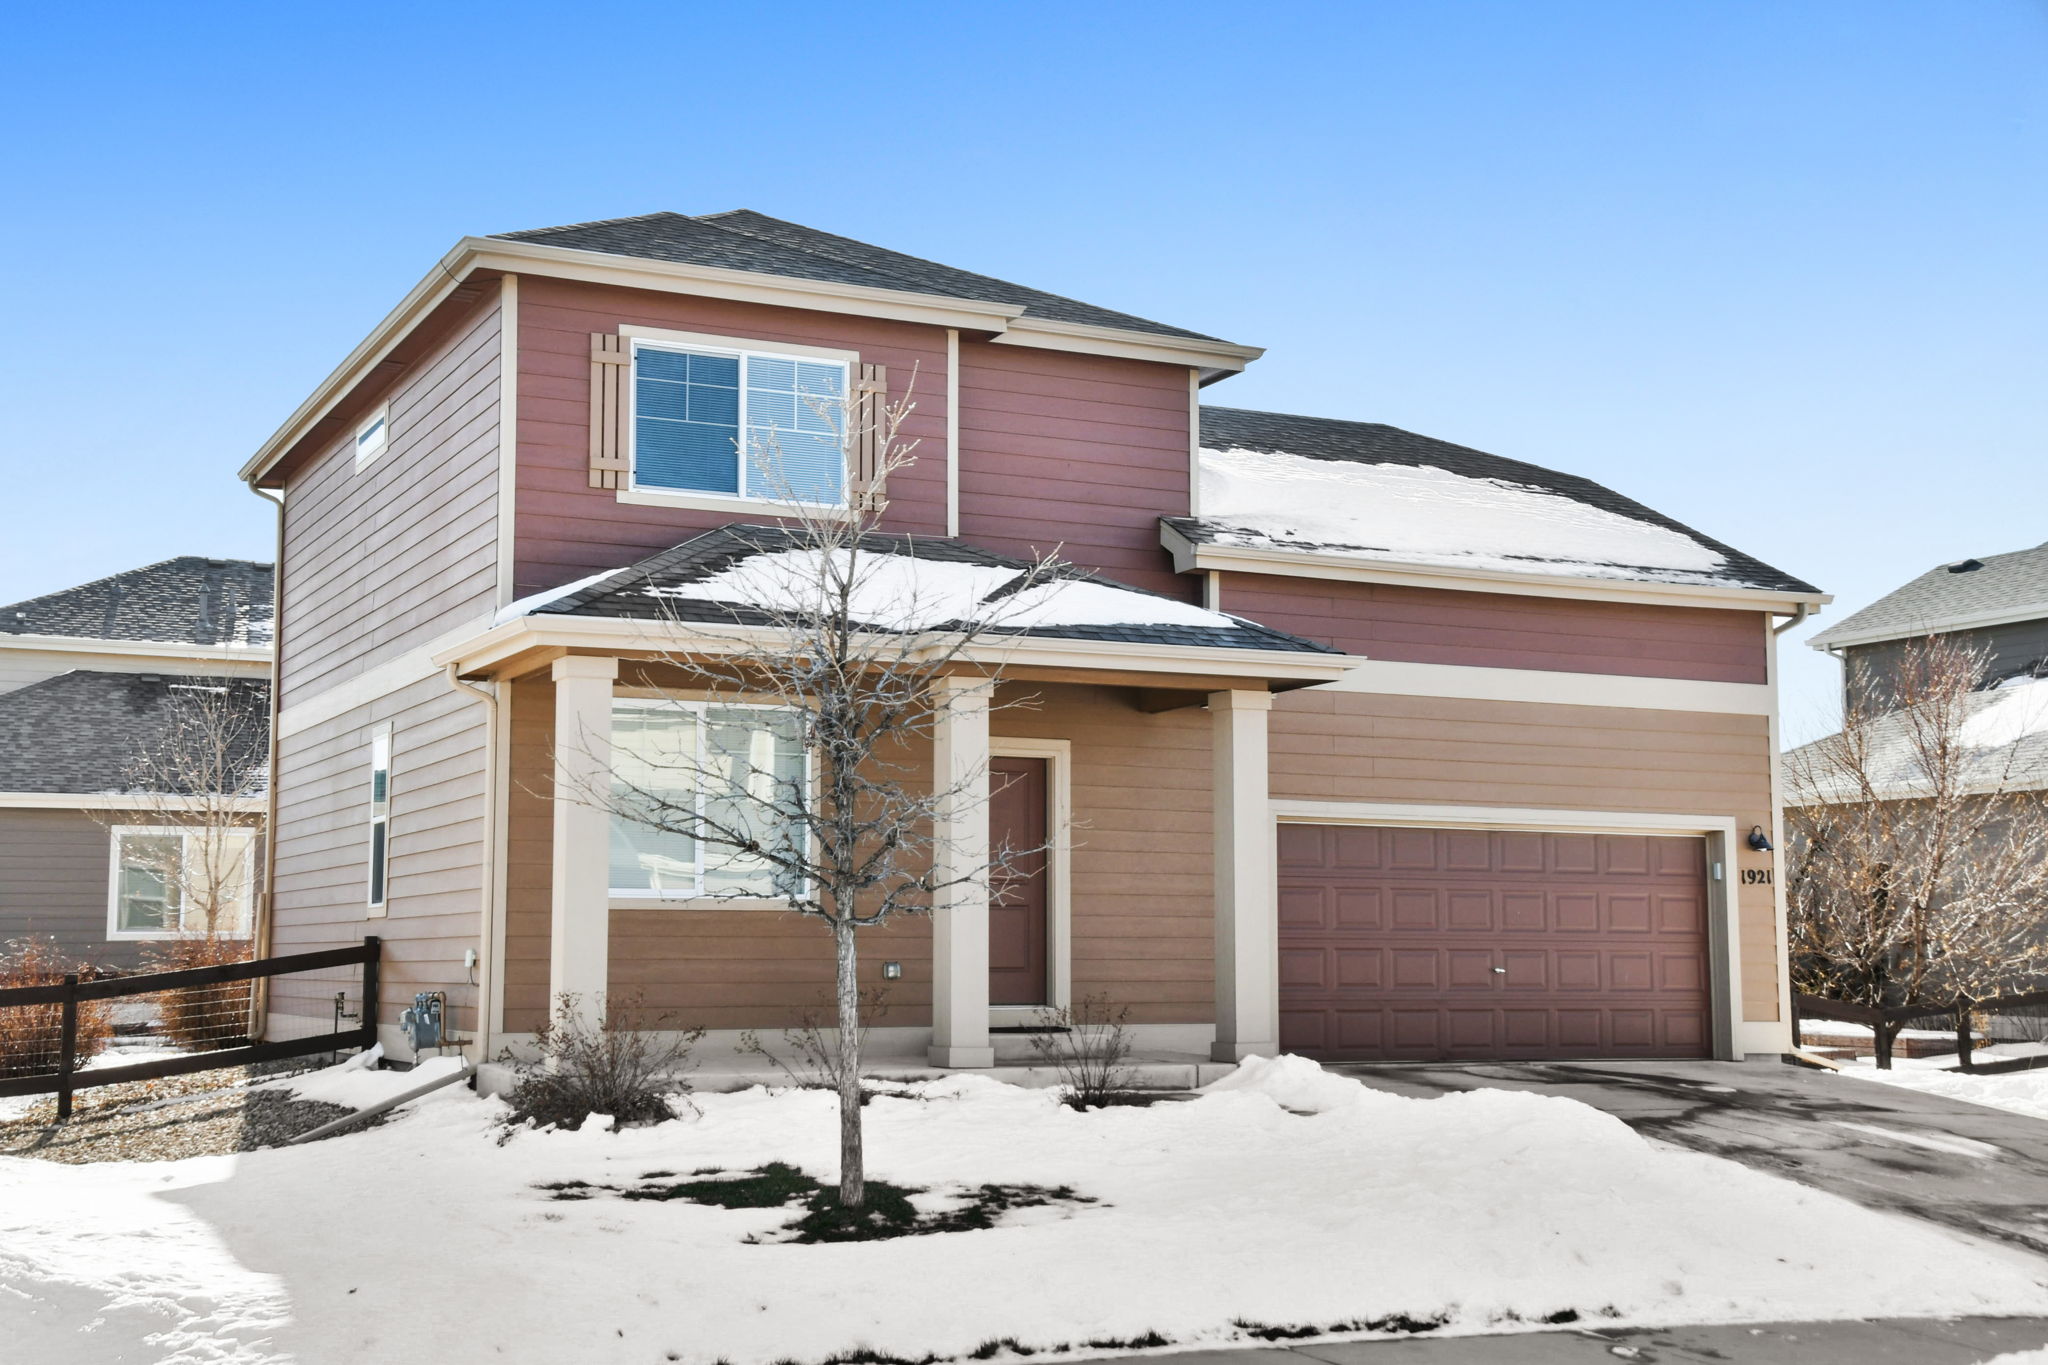  1921 Mackinac St, Fort Collins, CO 80524, US